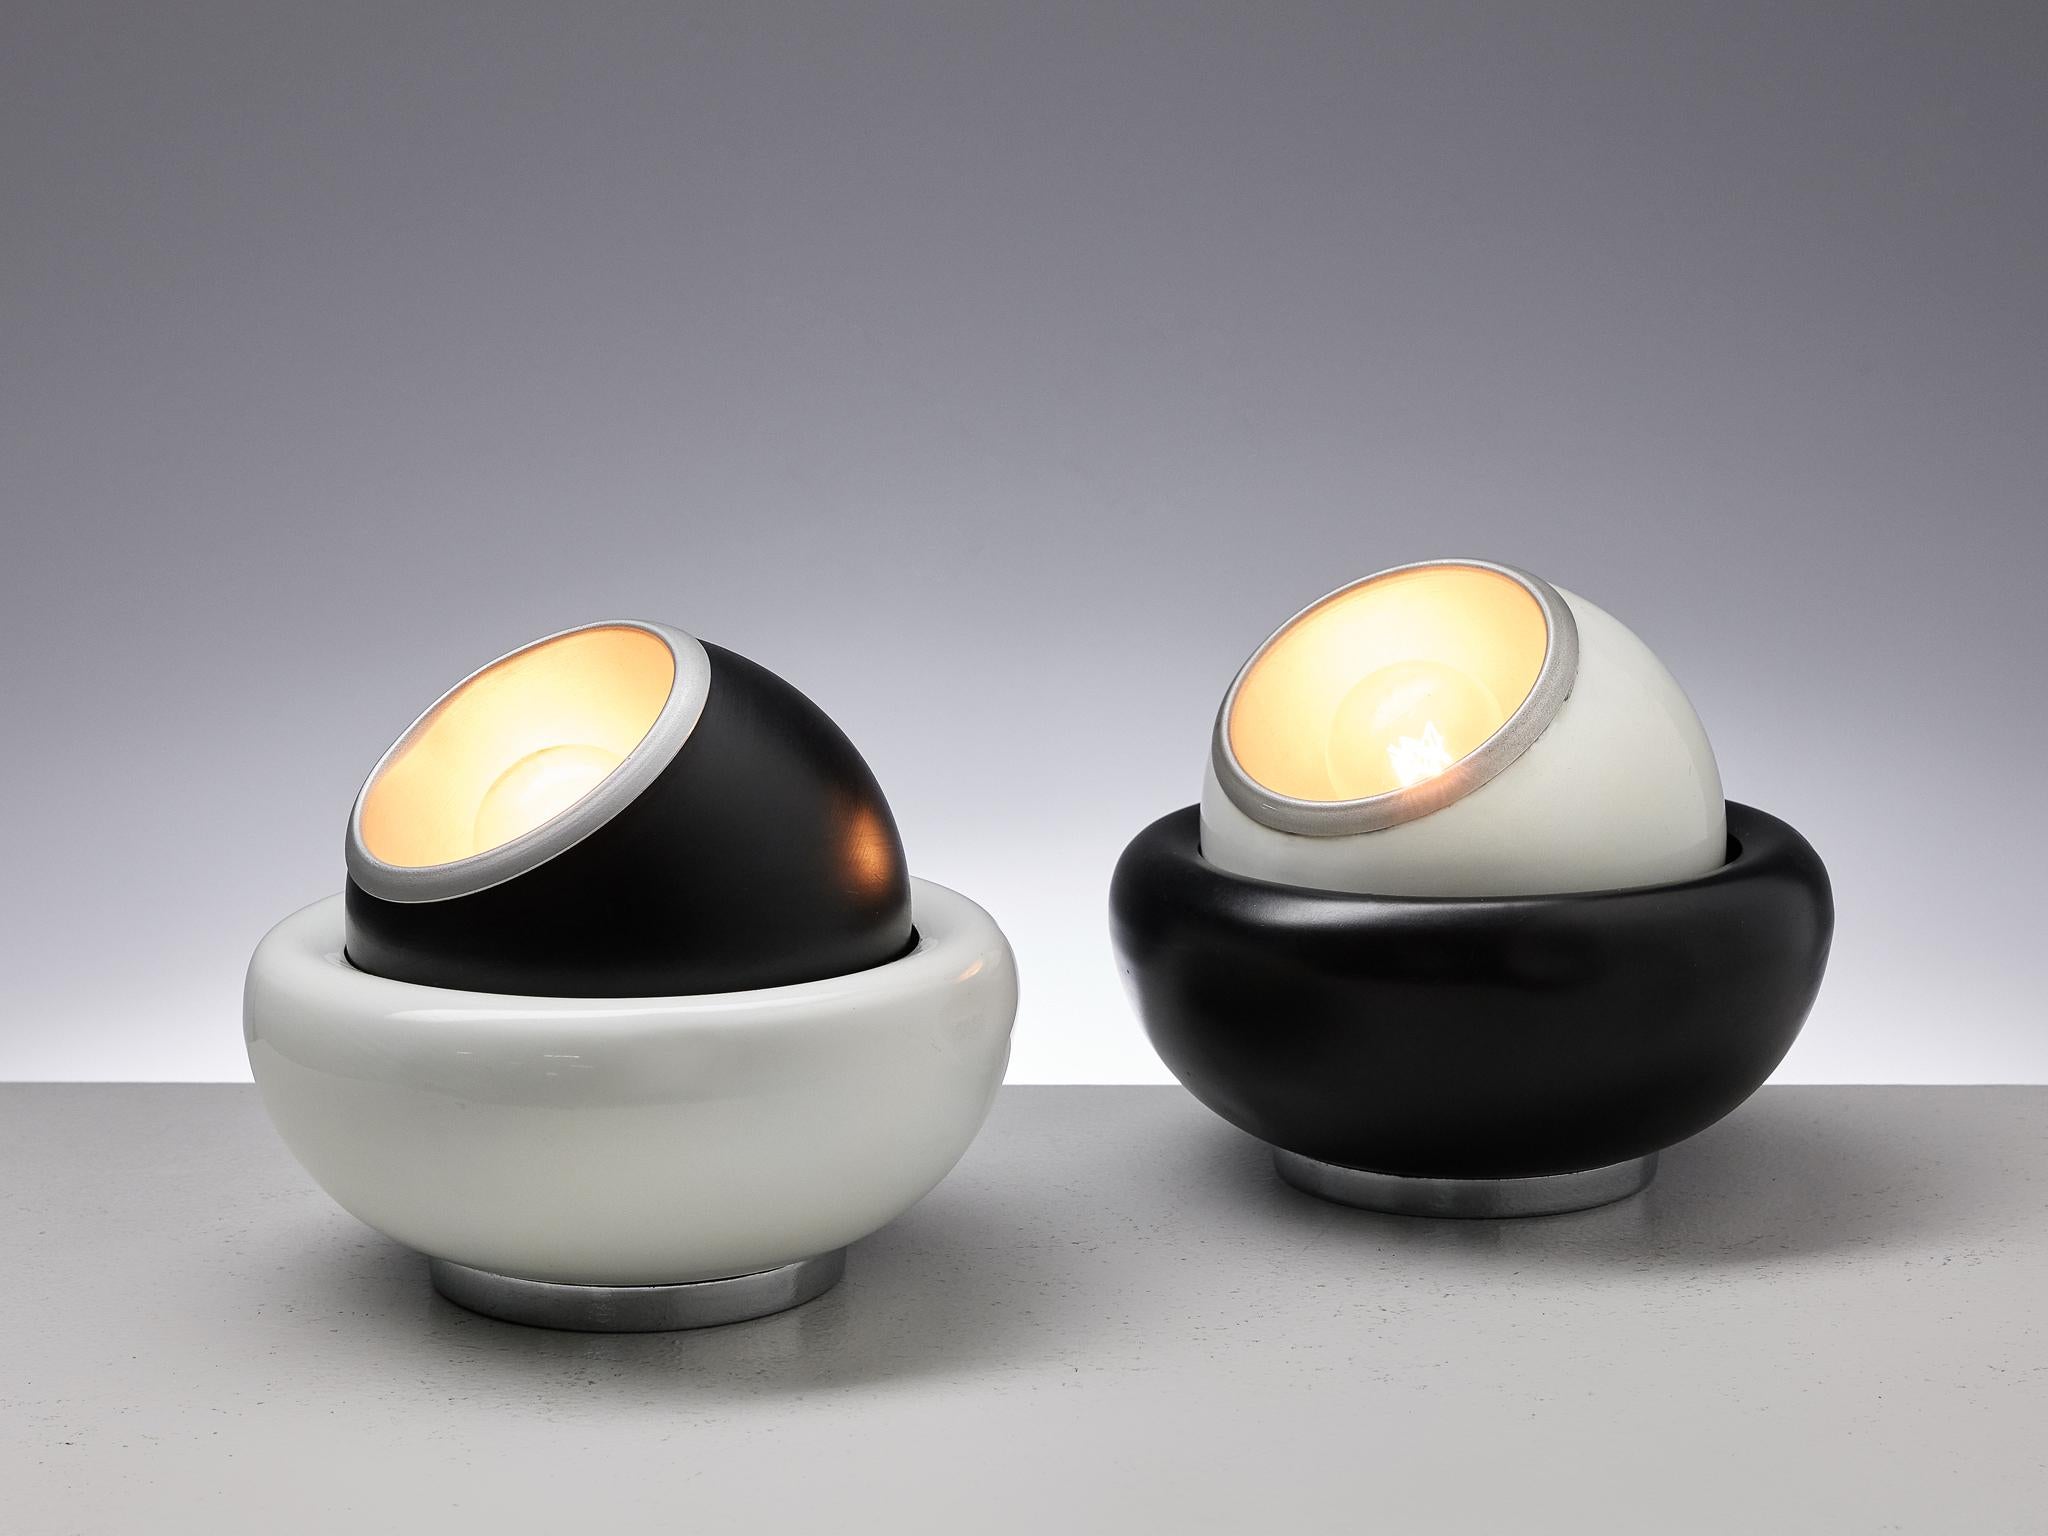 Pair of table lamp, lacquered metal, Italy, 1970s

A pair of Post Modern table lamps in black and white lacquered metal. The lights consist of a bowl that holds the spheres, which can be rotated in any direction. The light bulbs create a direct